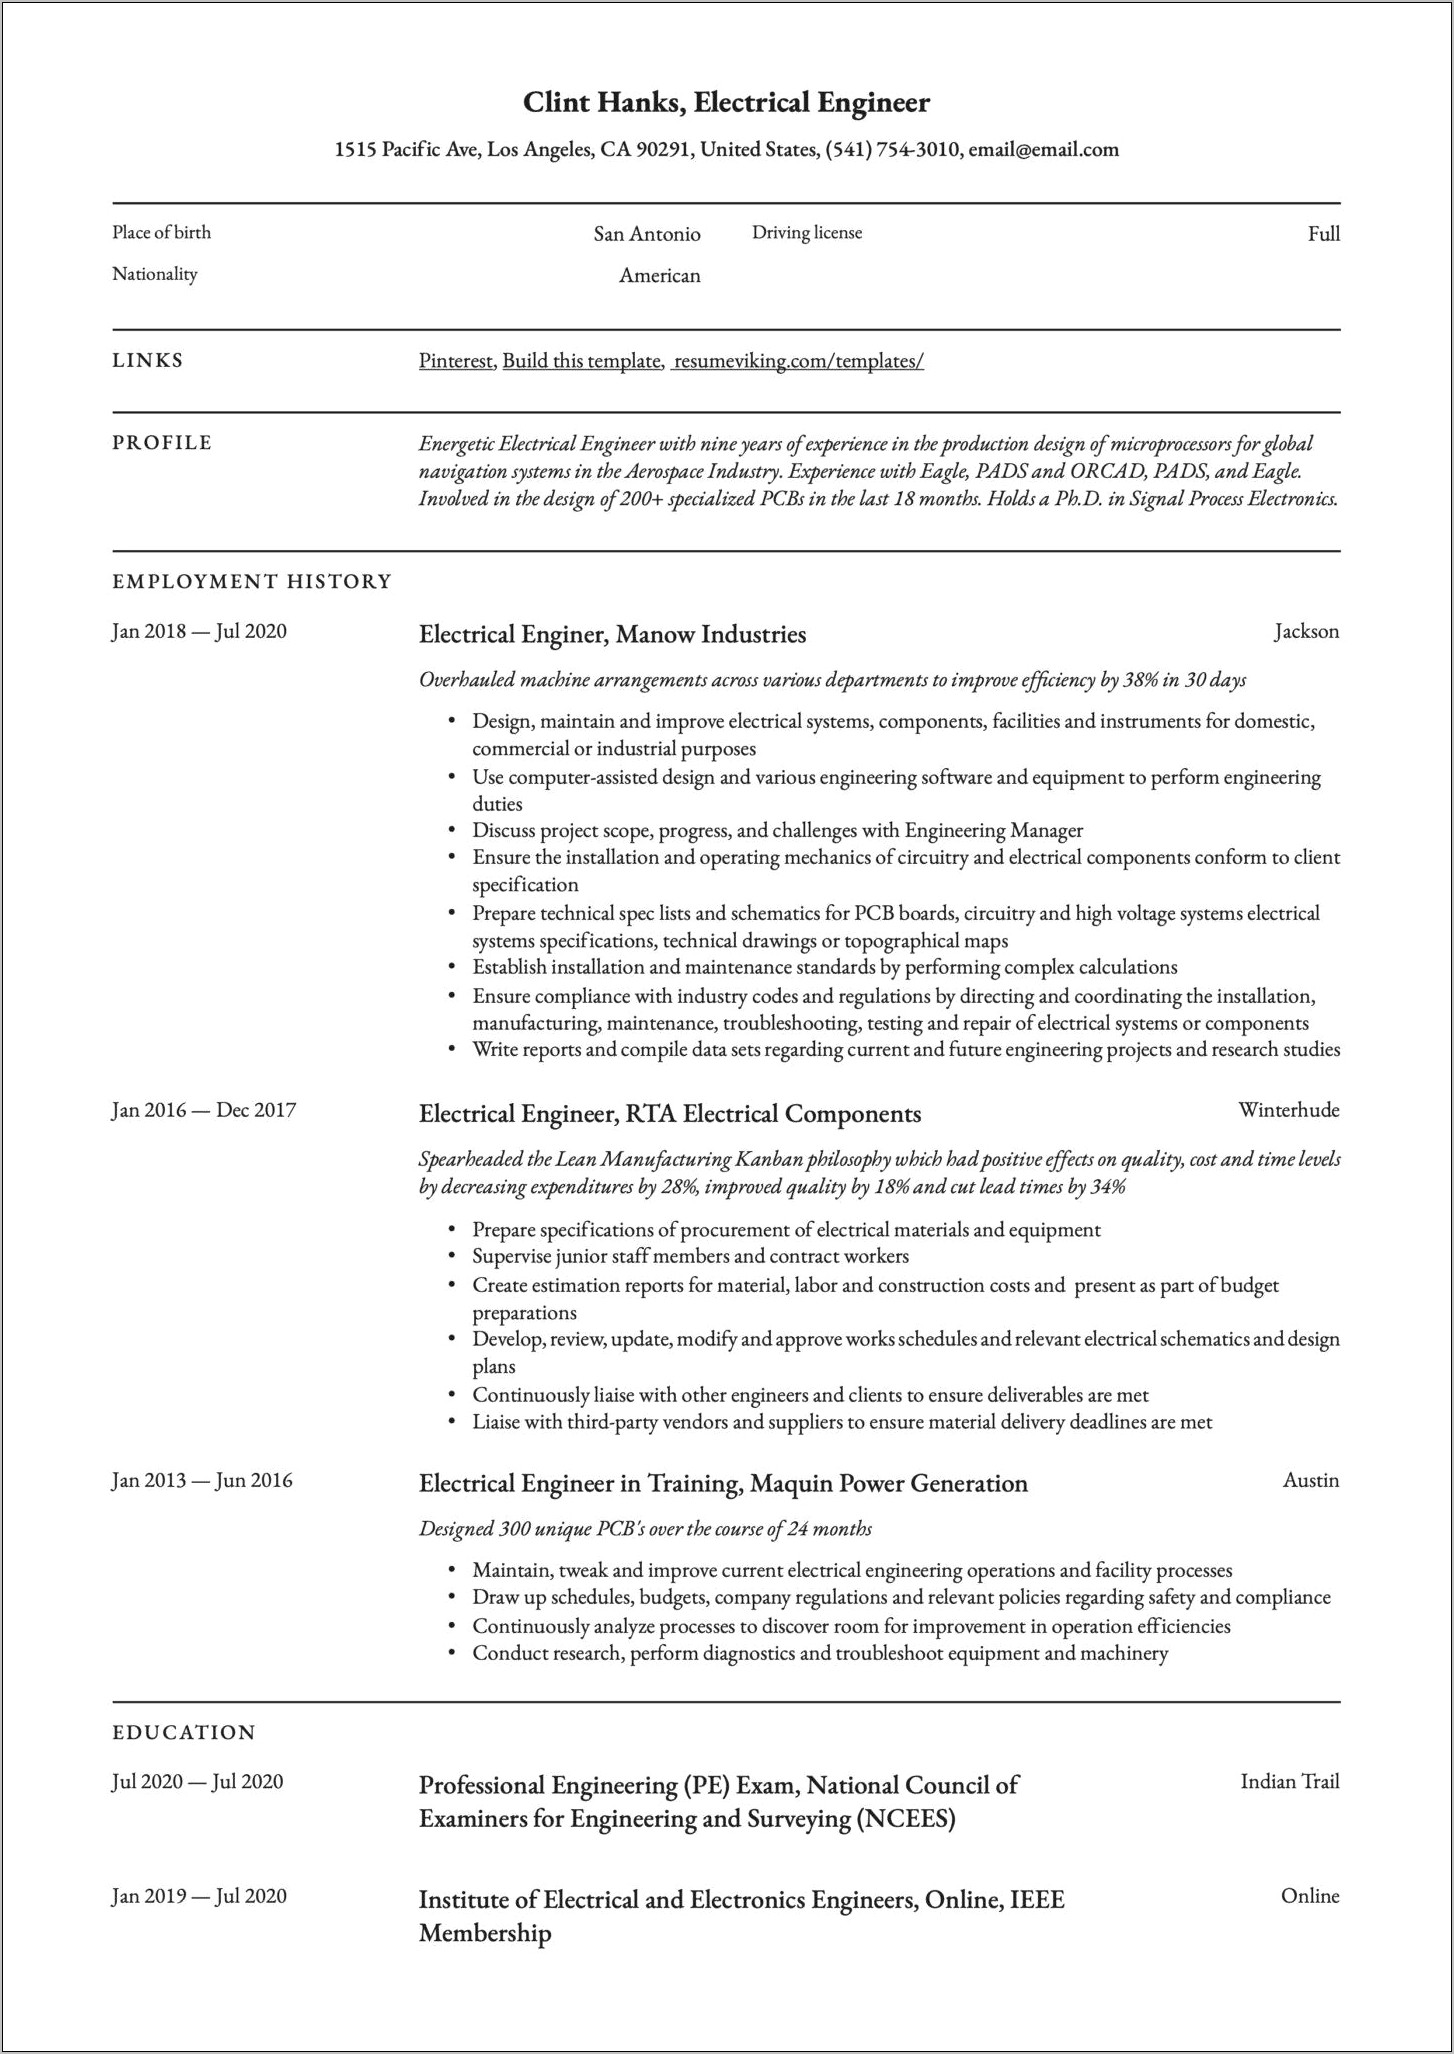 Electrical Engineering Resume With No Experience